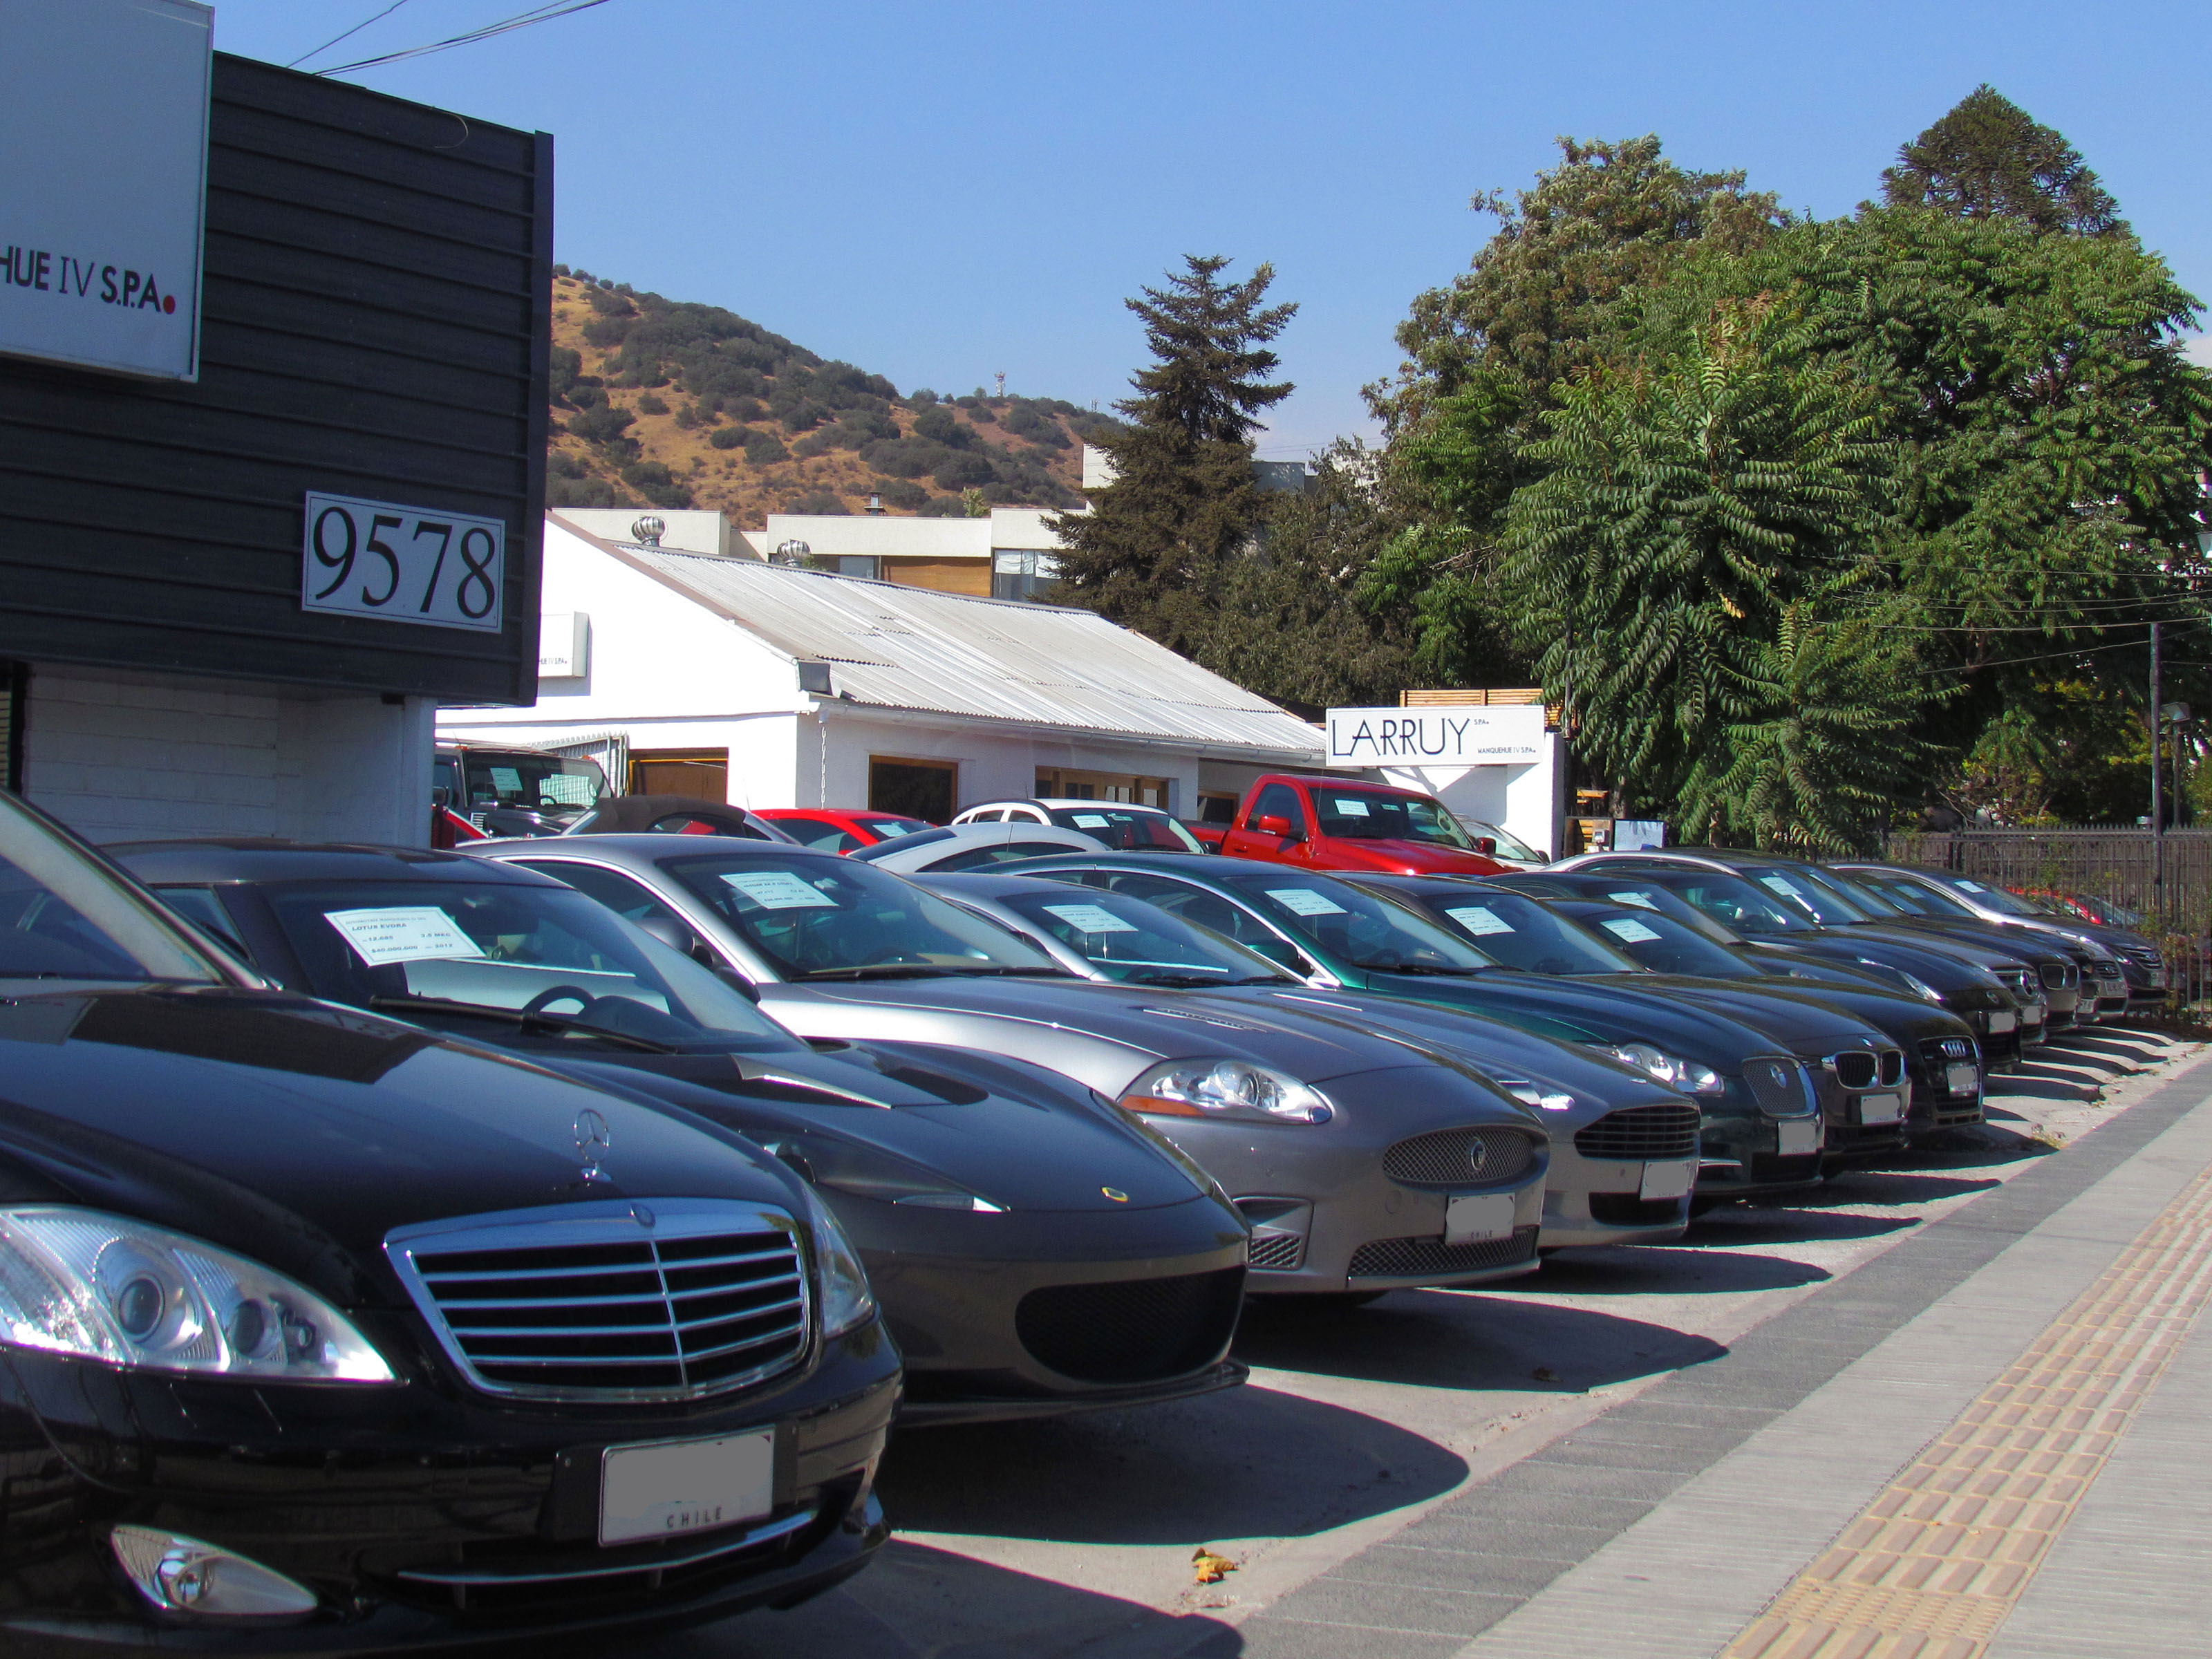 Factors to Evaluate for a Seamless Luxury Car Purchase Experience